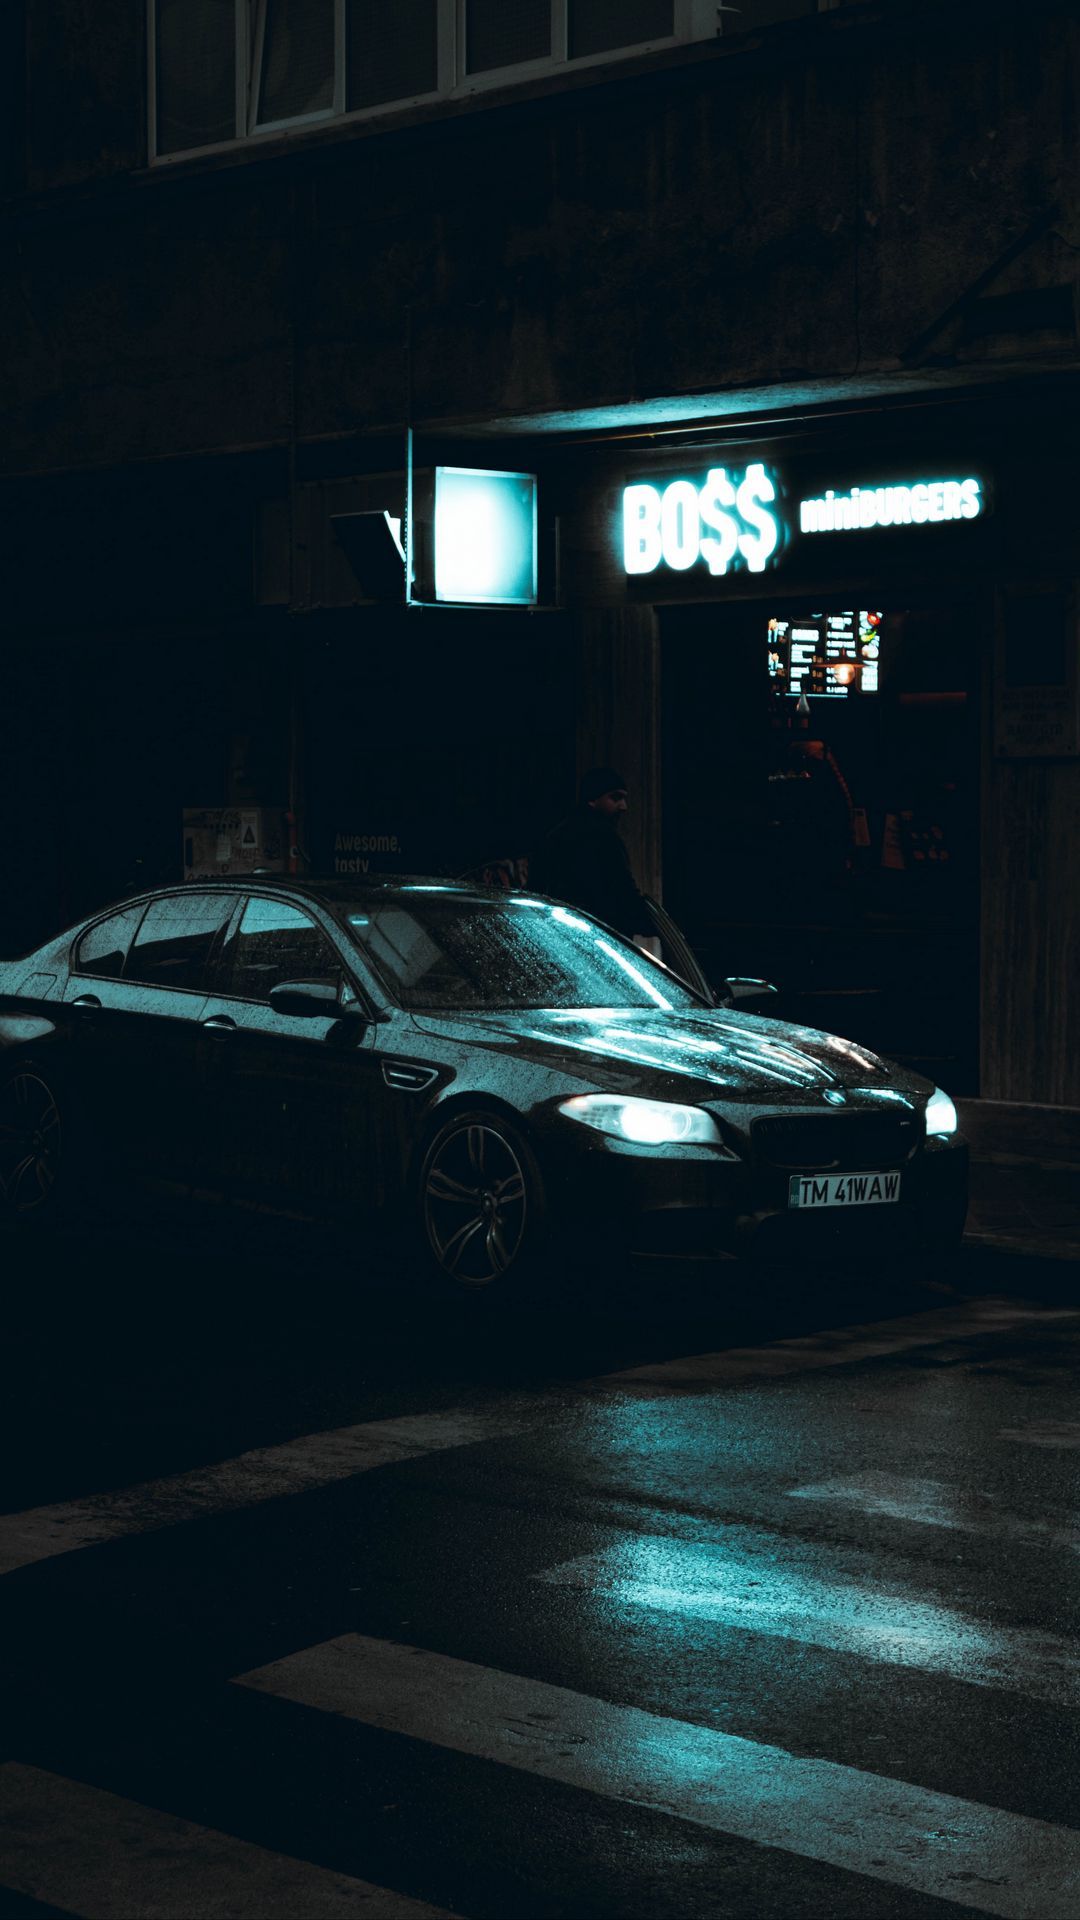 A car parked in front of an illuminated store - BMW